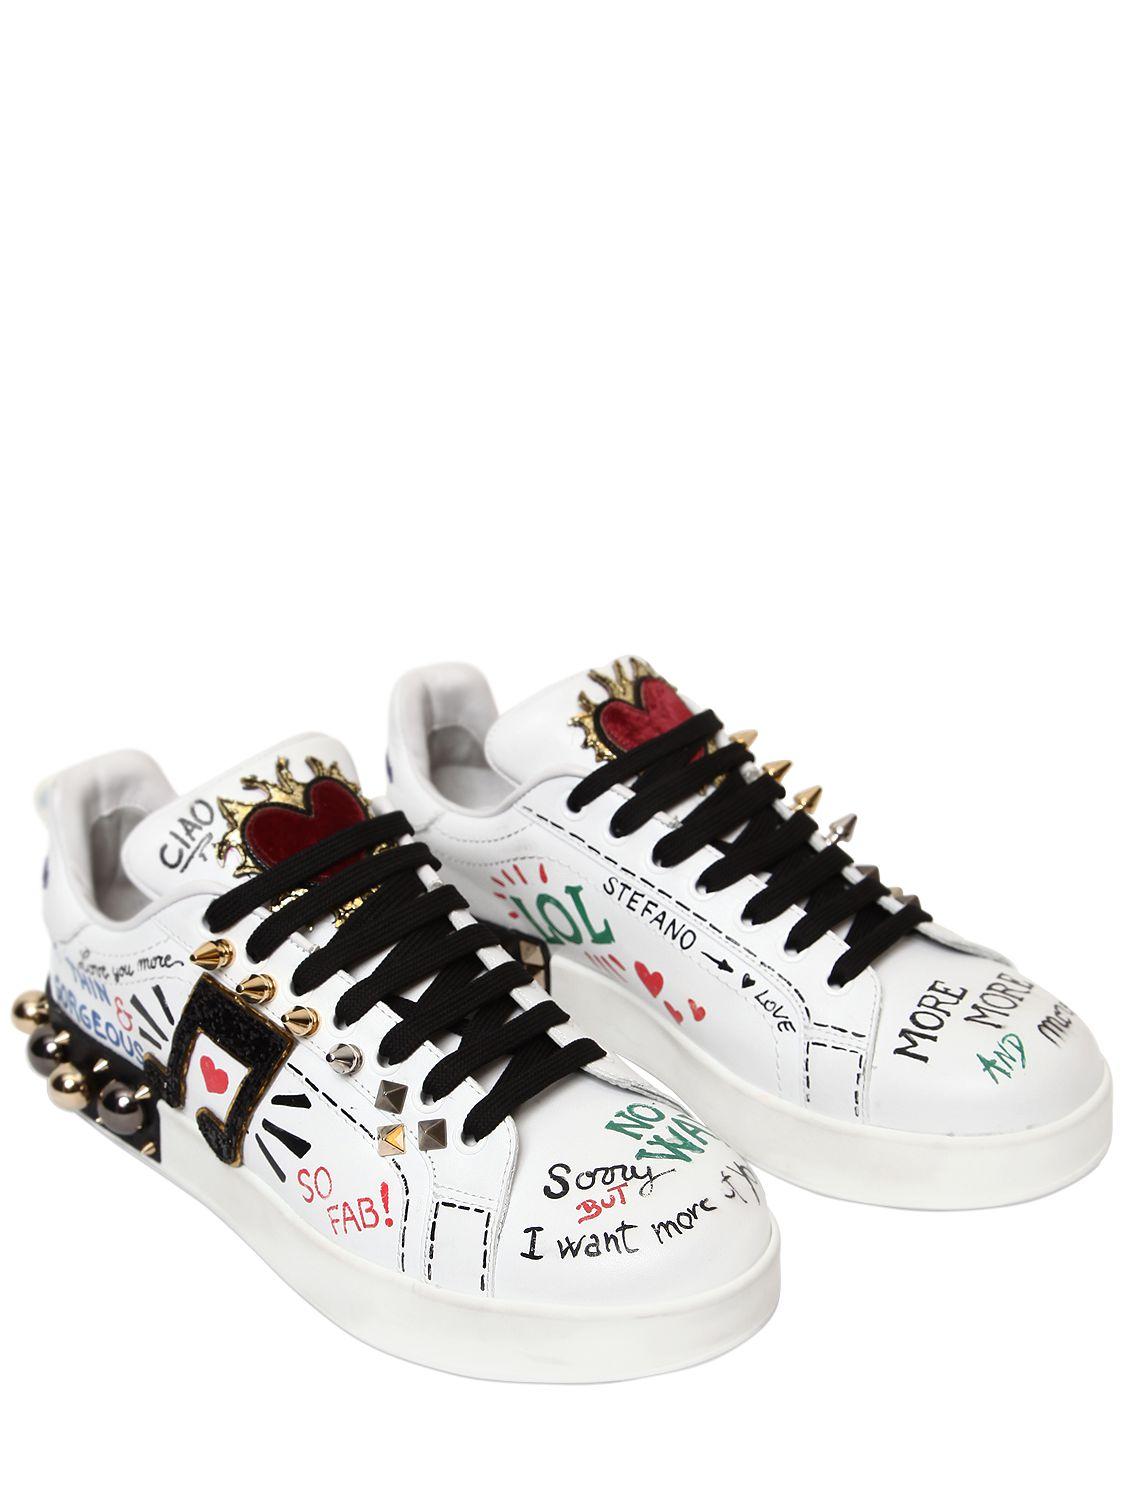 Dolce & Gabbana 20mm Portofino Studded Leather Sneakers in White - Lyst